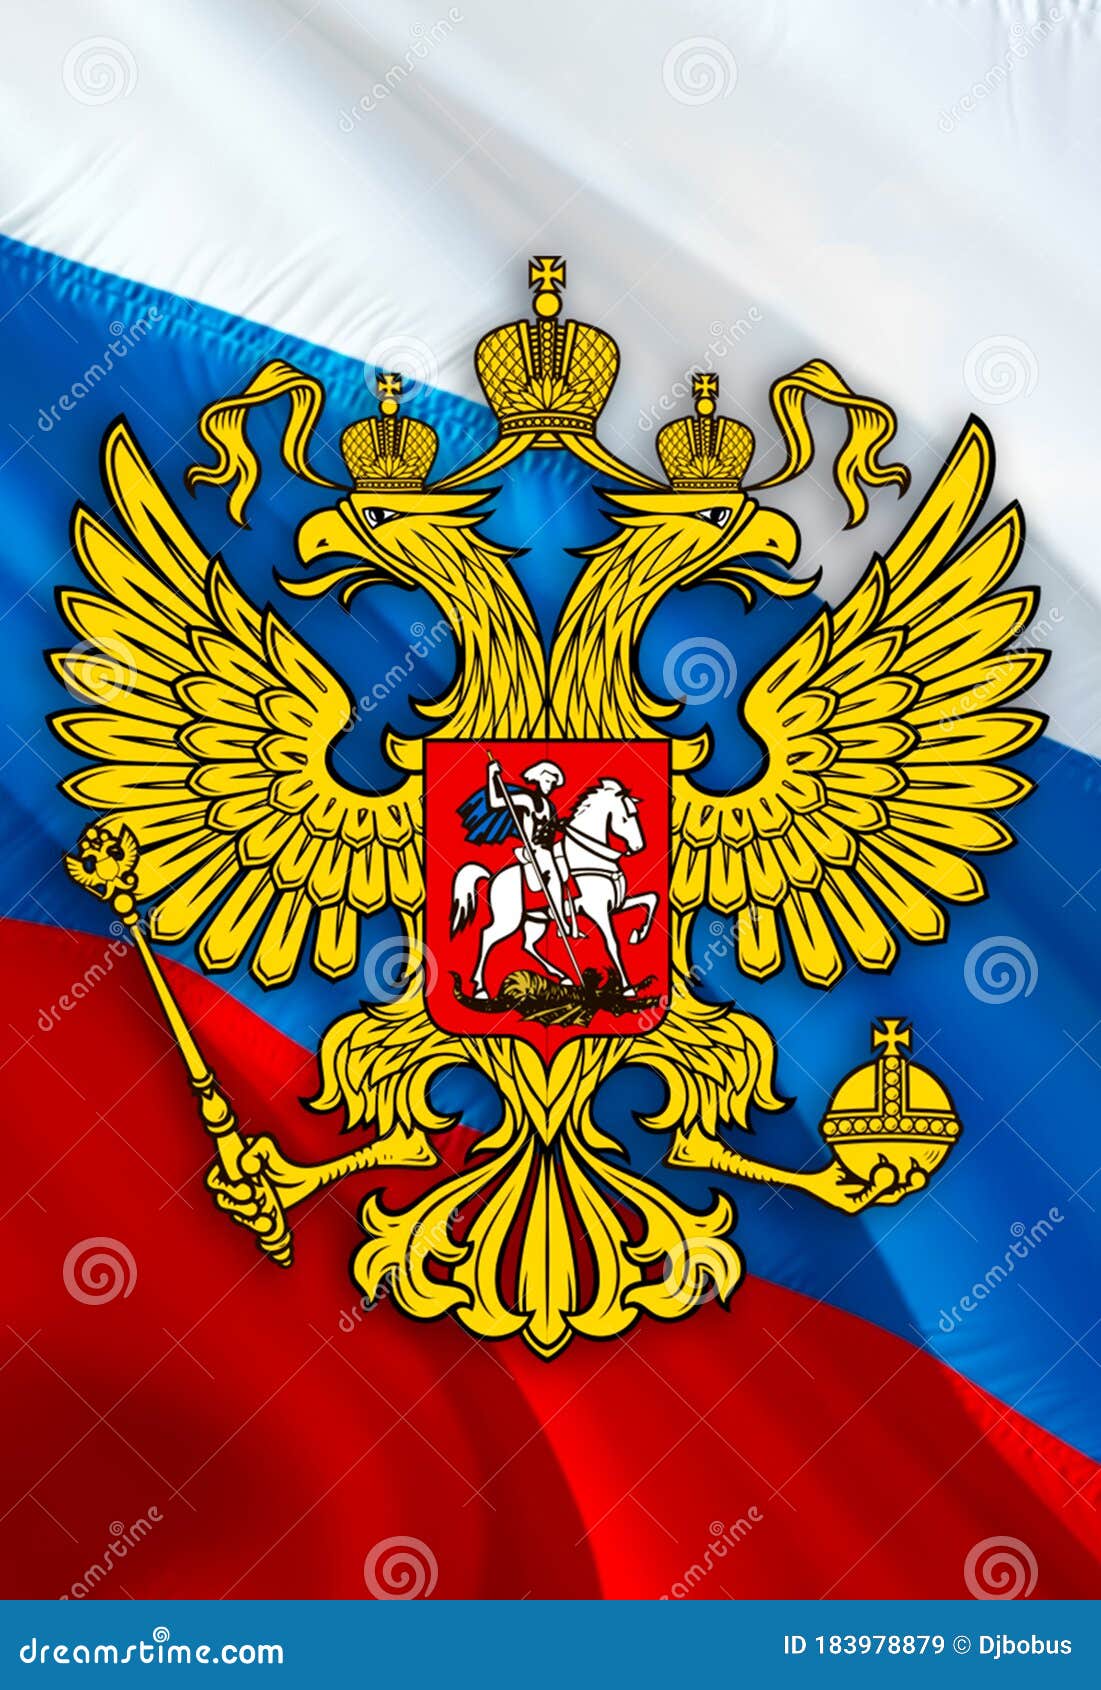 Flag of russia Template | PosterMyWall